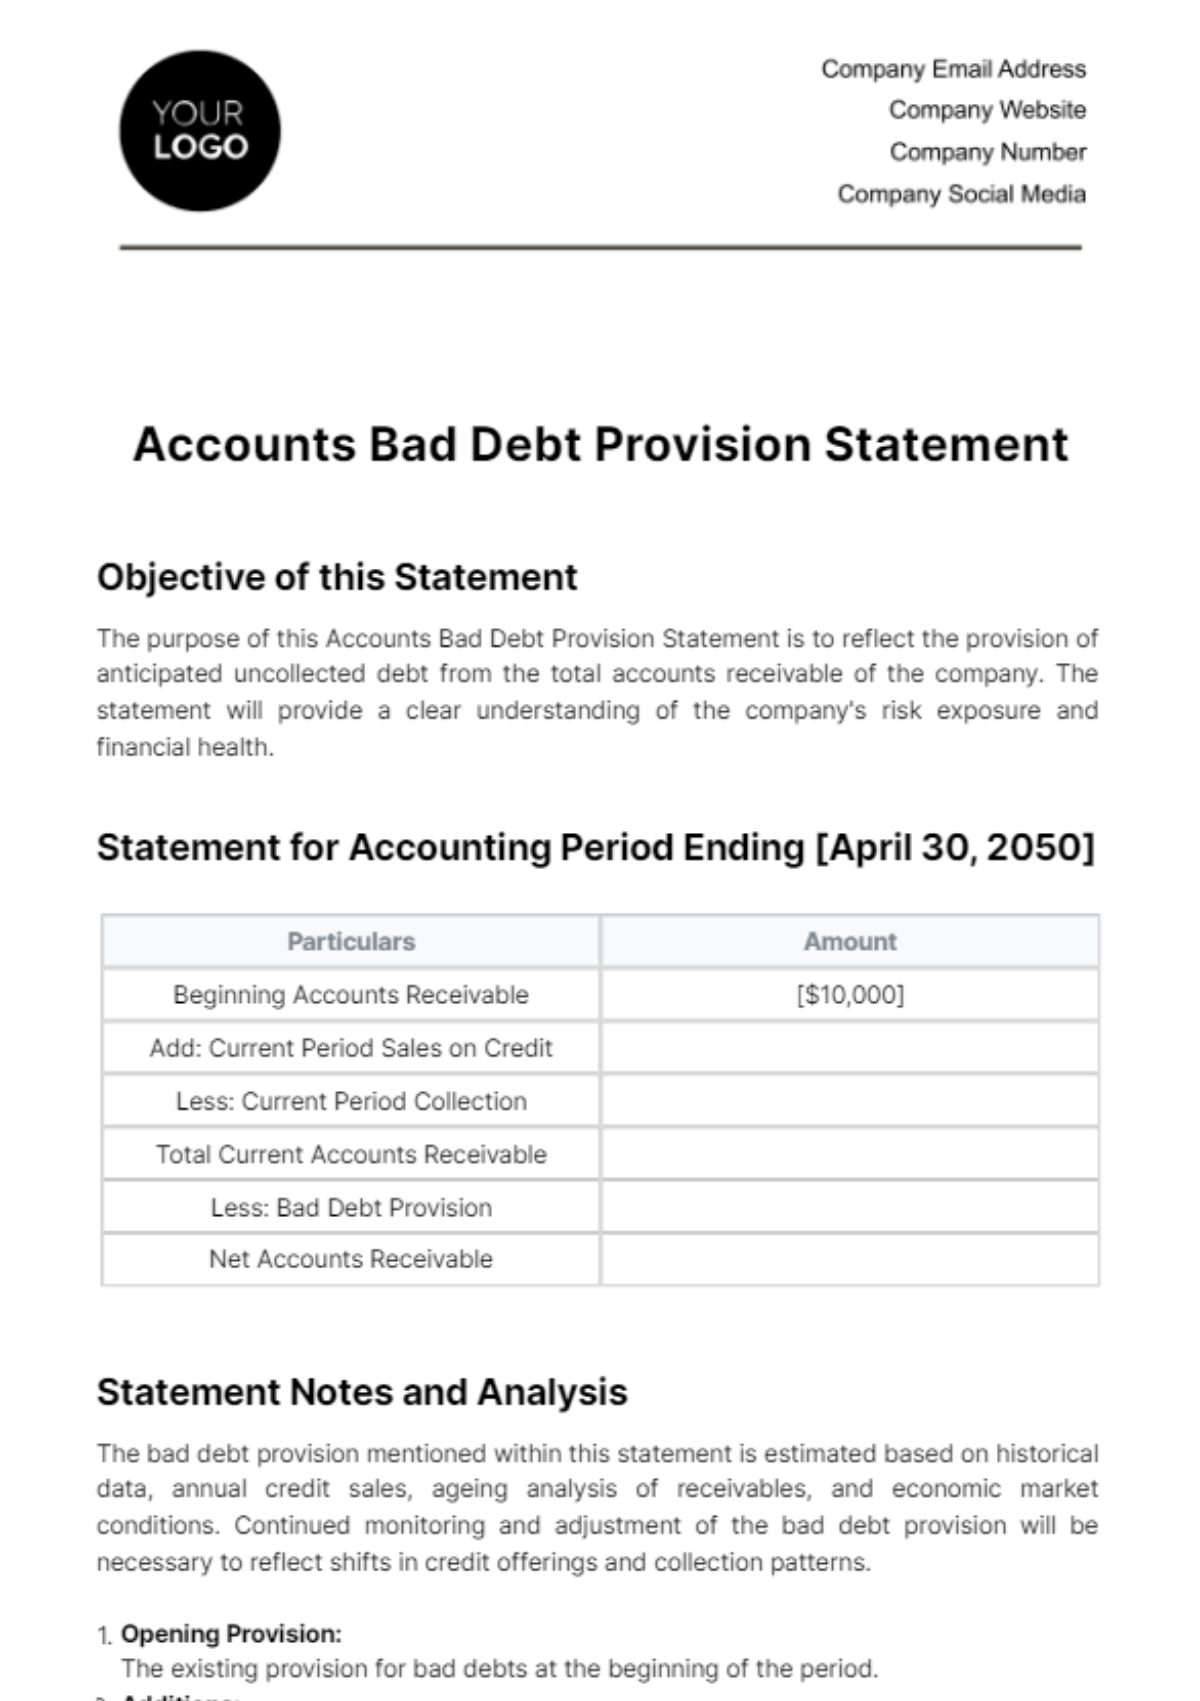 Free Accounts Bad Debt Provision Statement Template